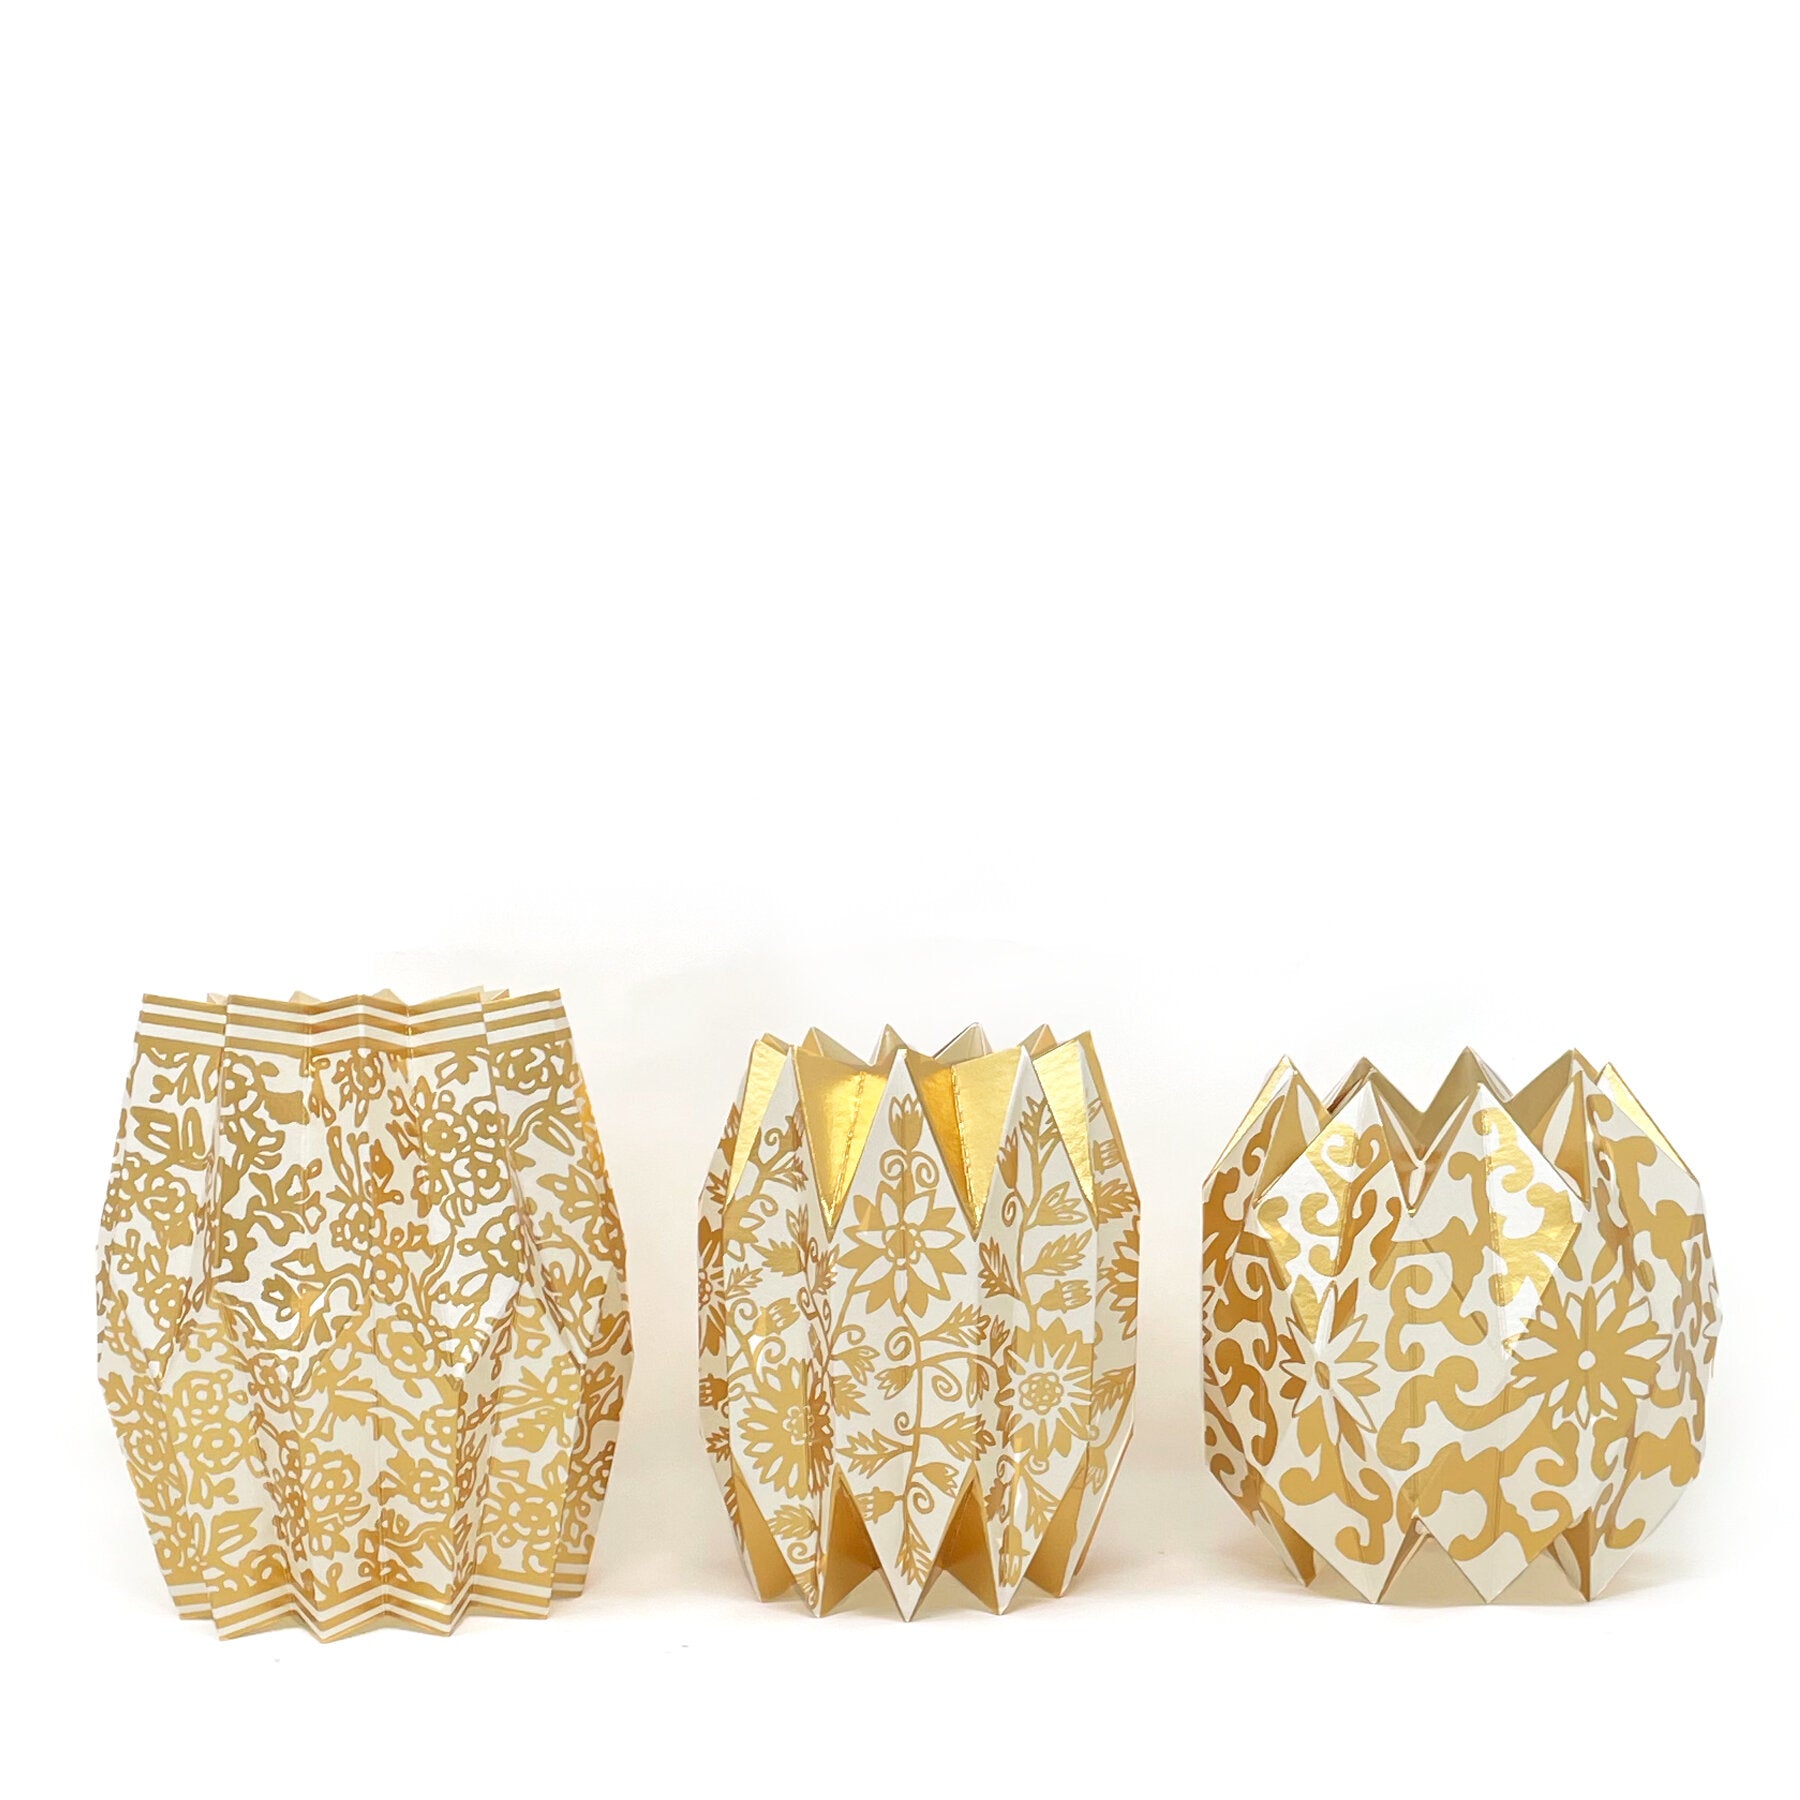 Gold and white chinoiserie paper sleeve vases